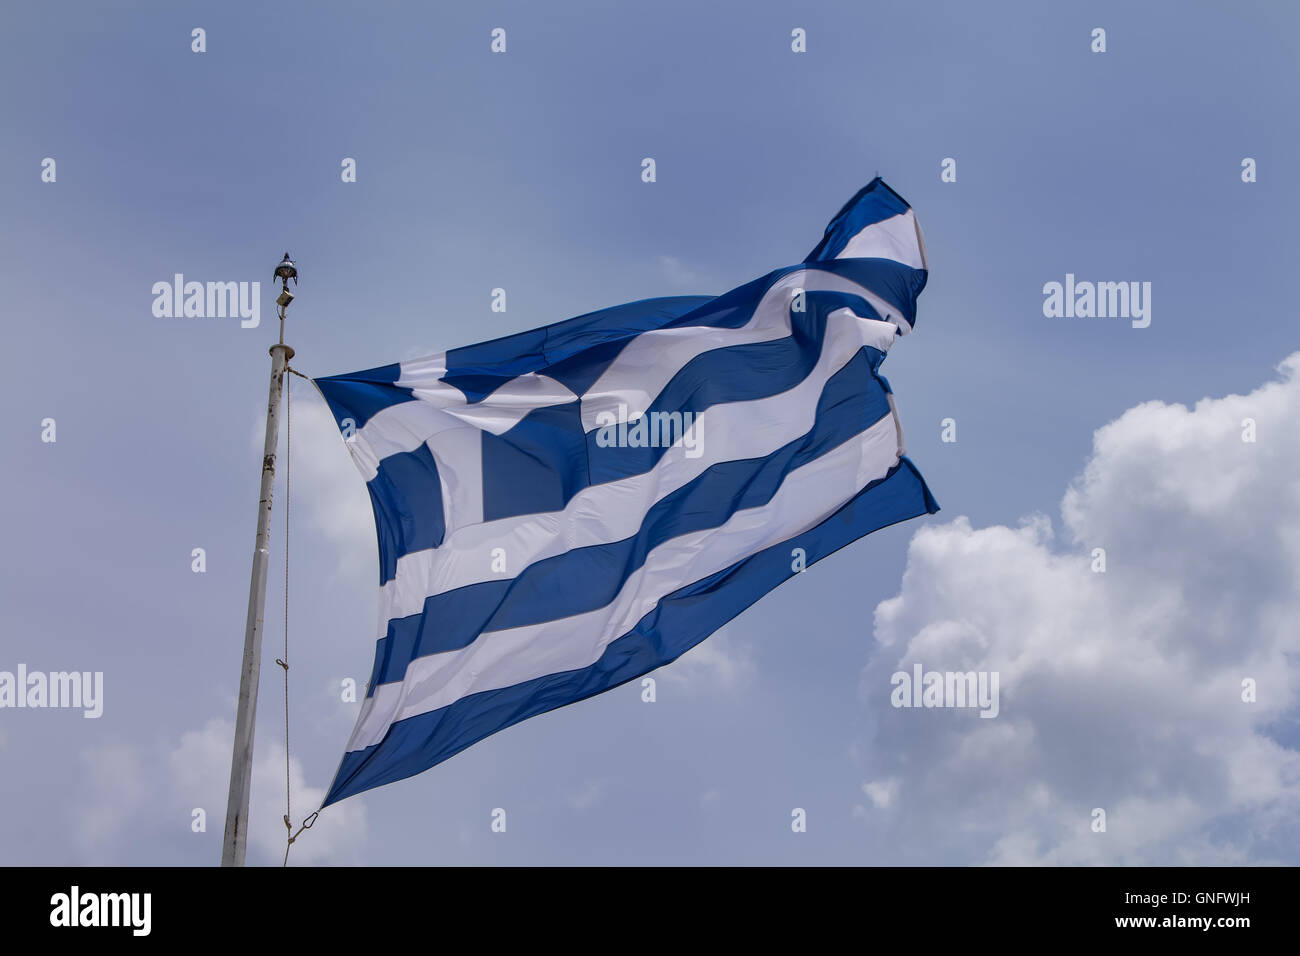 Greek flag blowing in the wind. Cloudy sky in the background. Stock Photo